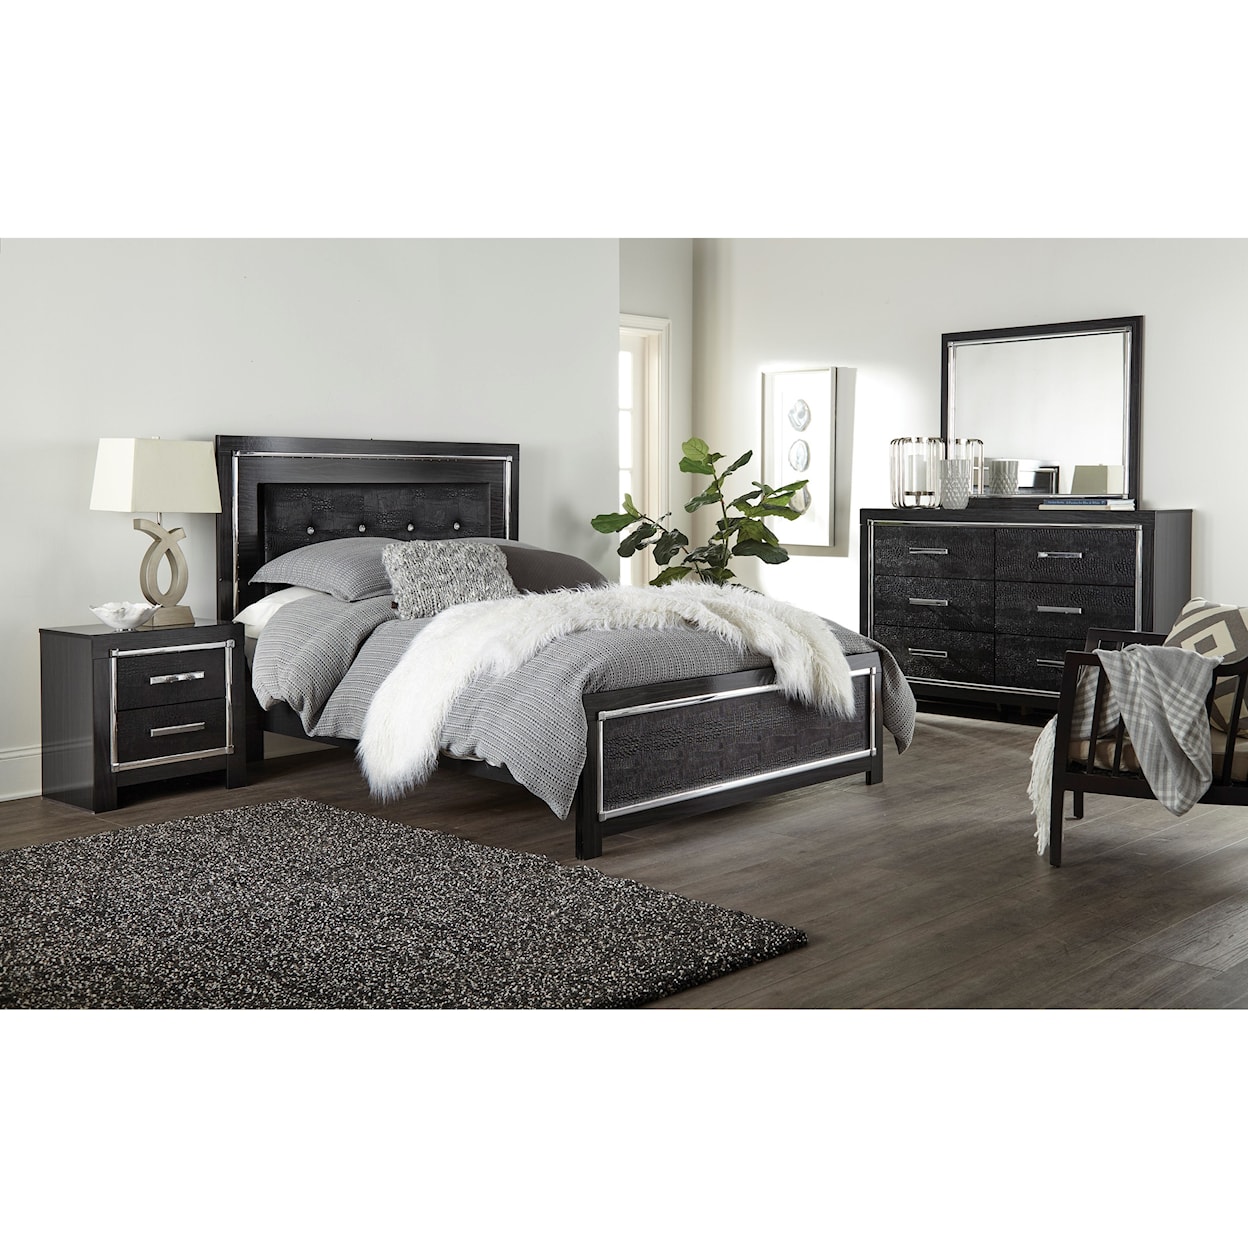 Signature Design by Ashley Kaydell 6PC Queen Bedroom Group